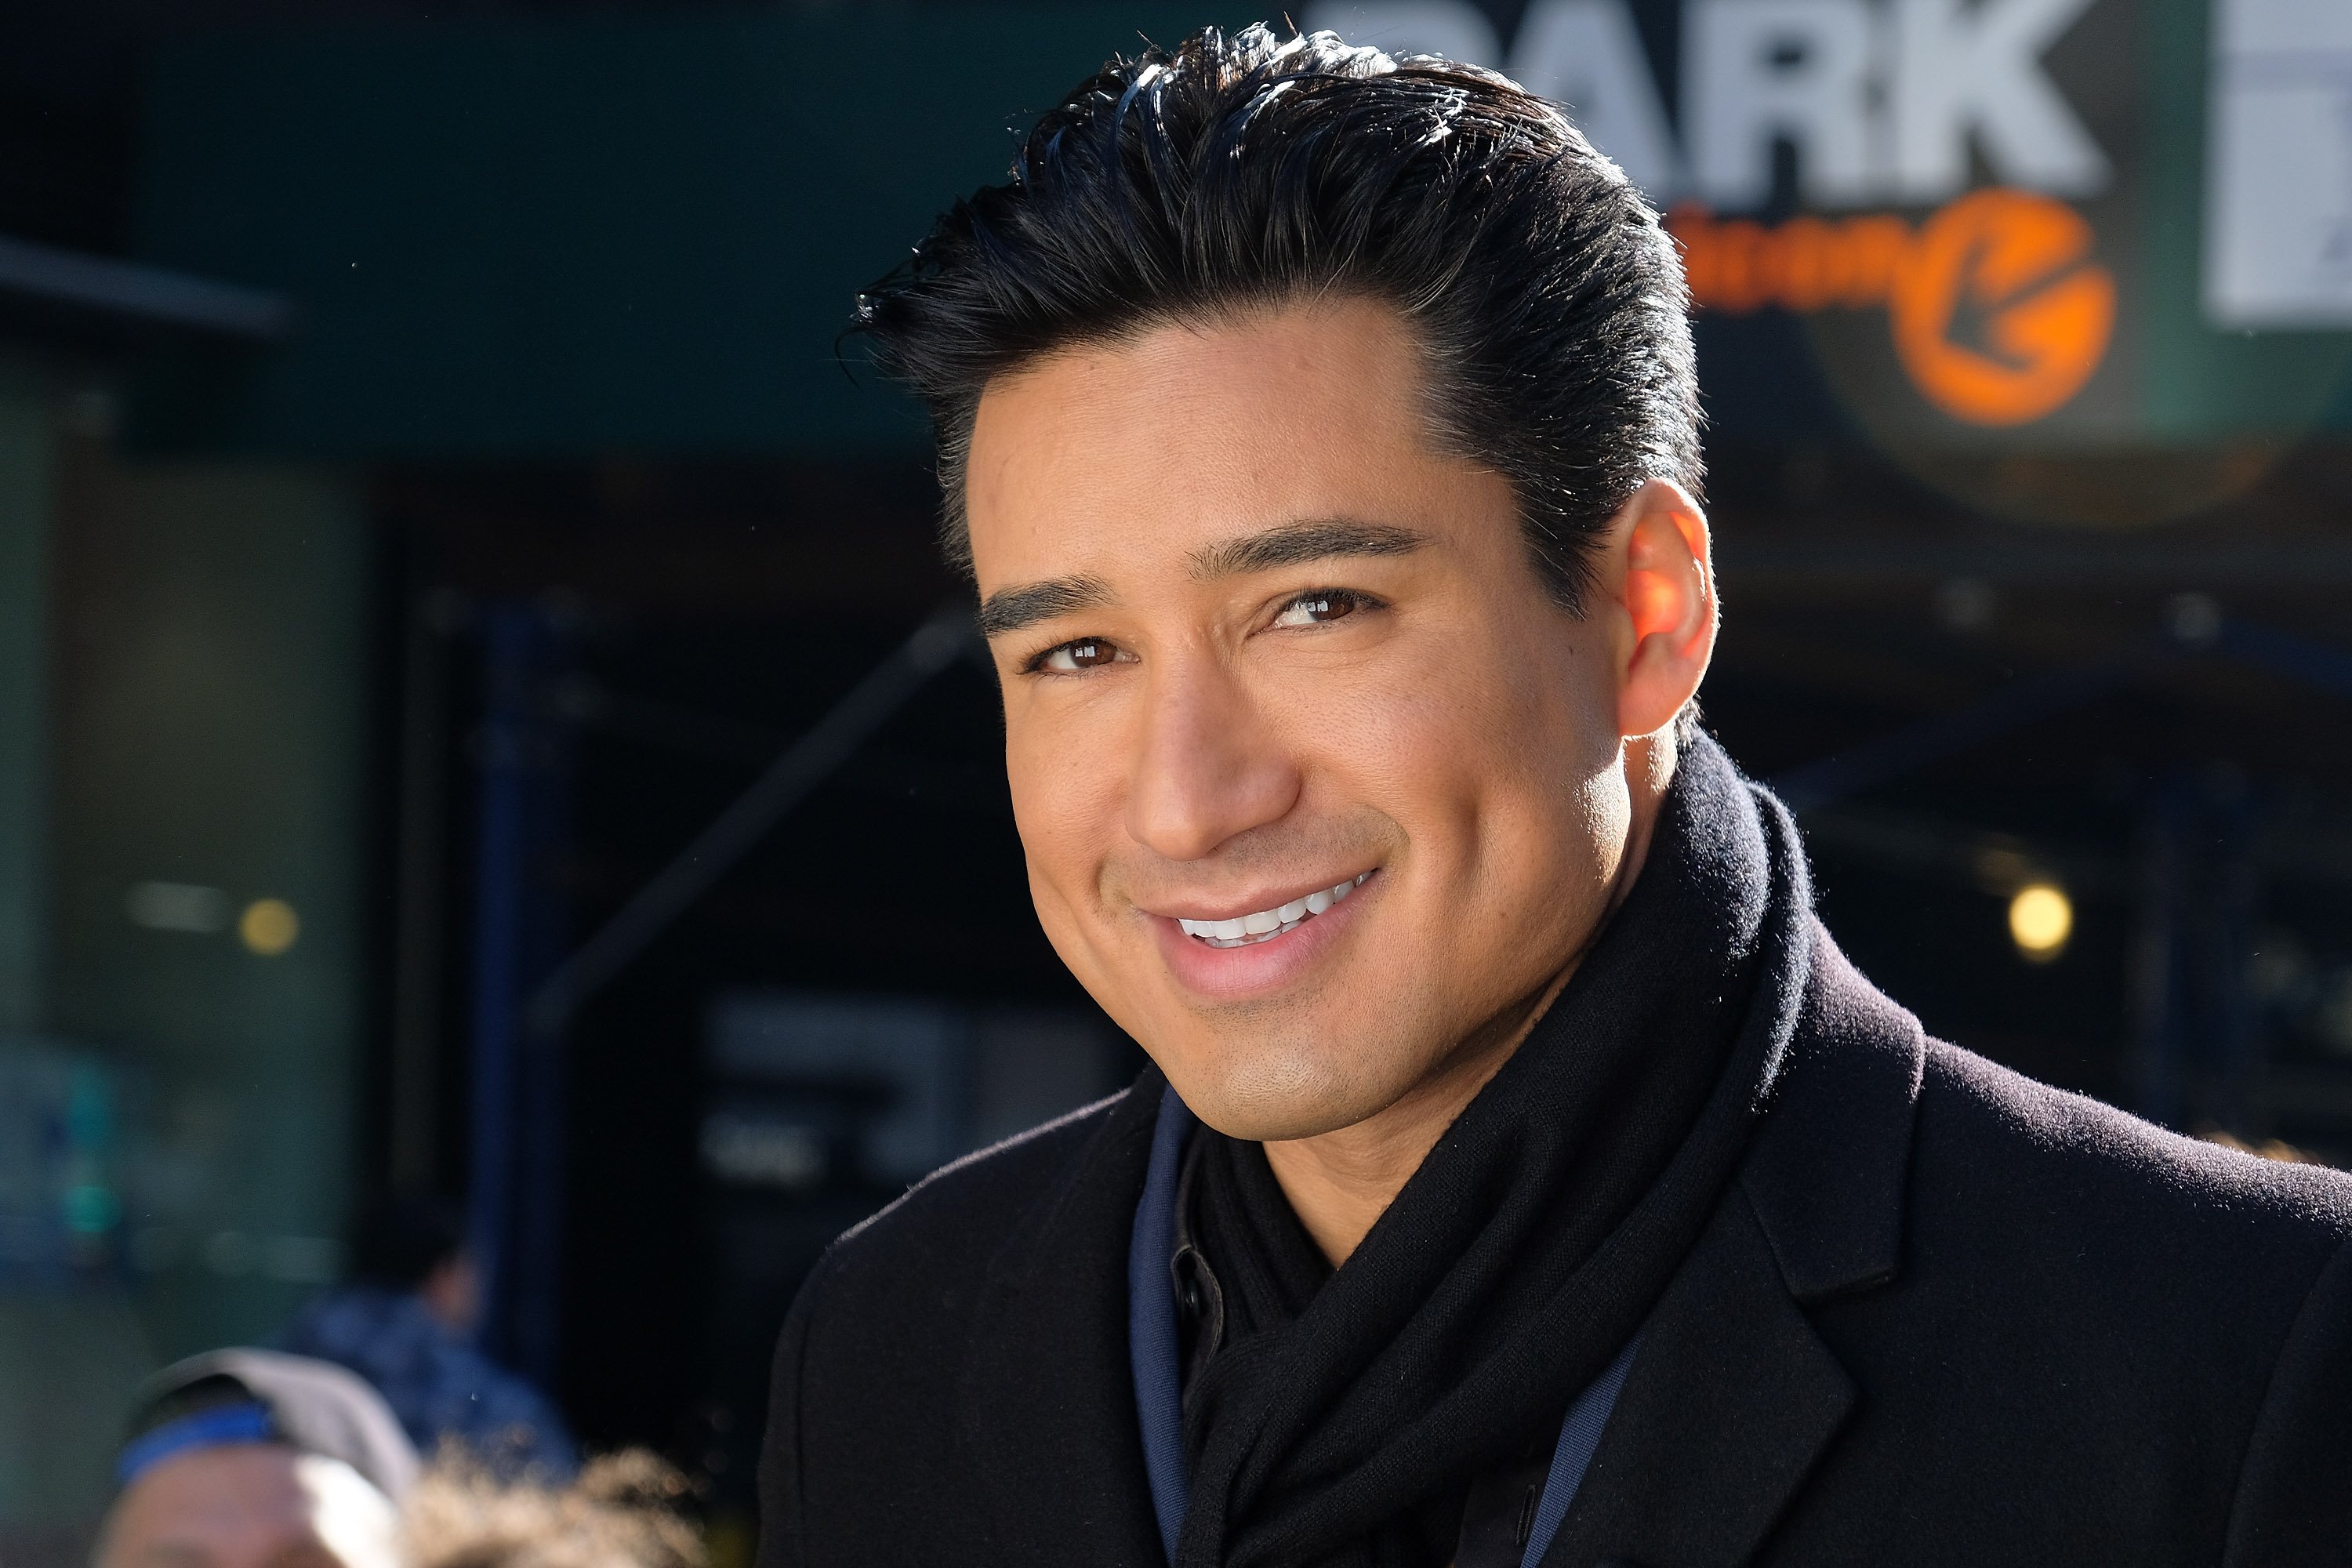 Mario Lopez films for 'Extra' in 2017